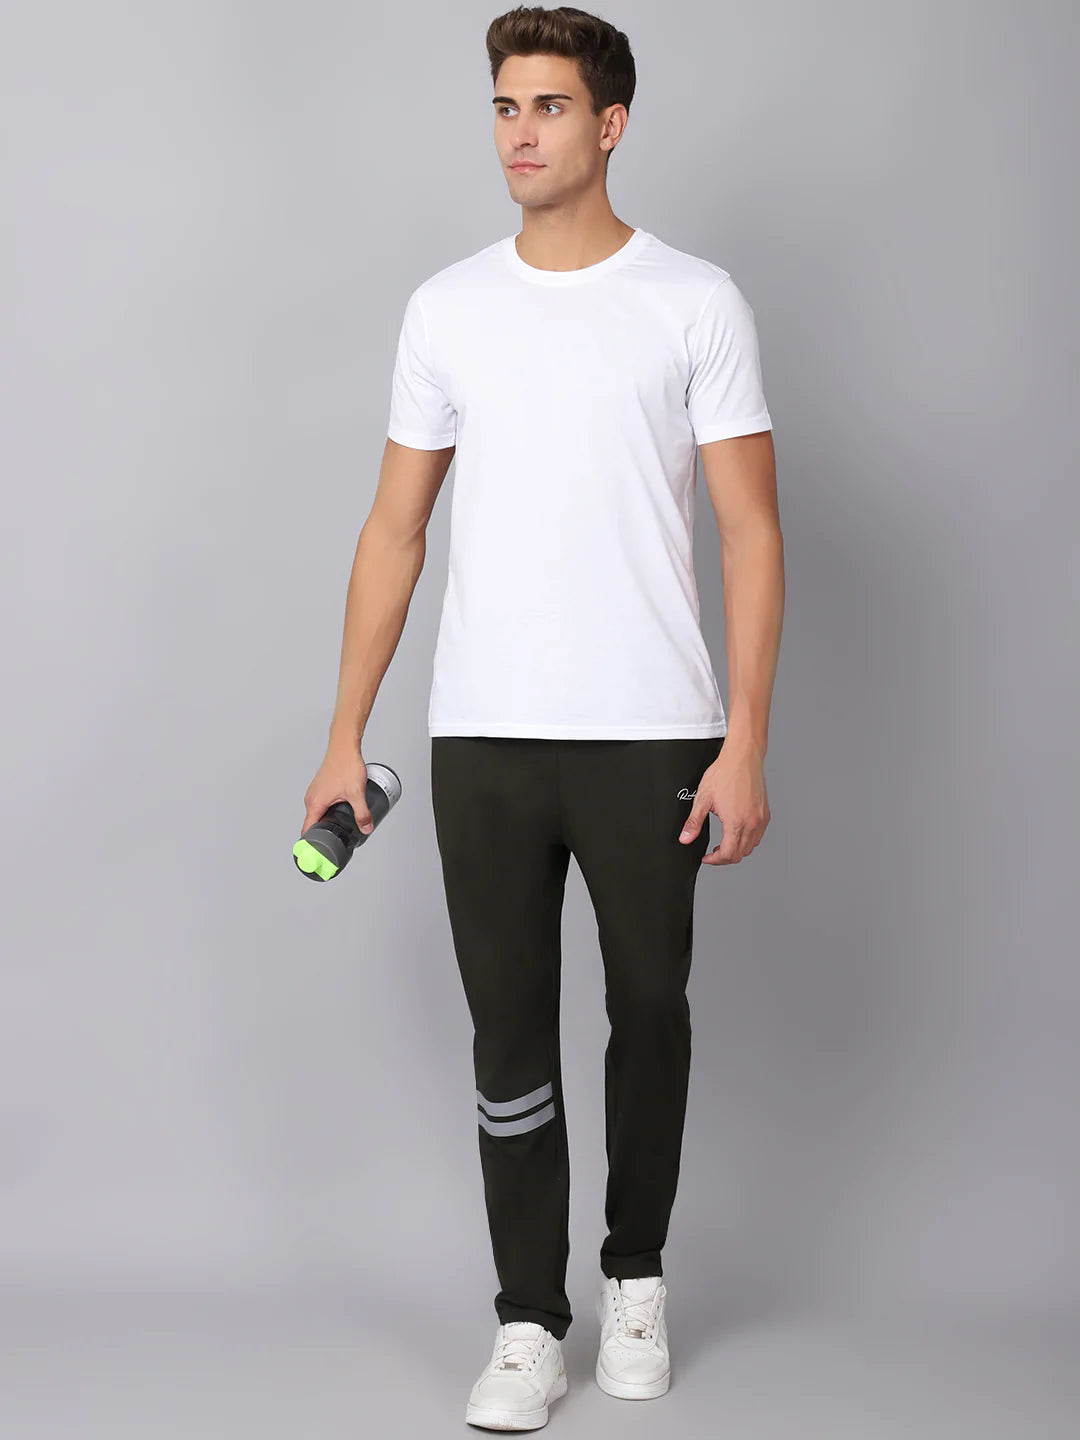 Mens Sports Wear Track Pant at Rs 275/piece | Men Sports Pants in New Delhi  | ID: 21709426397